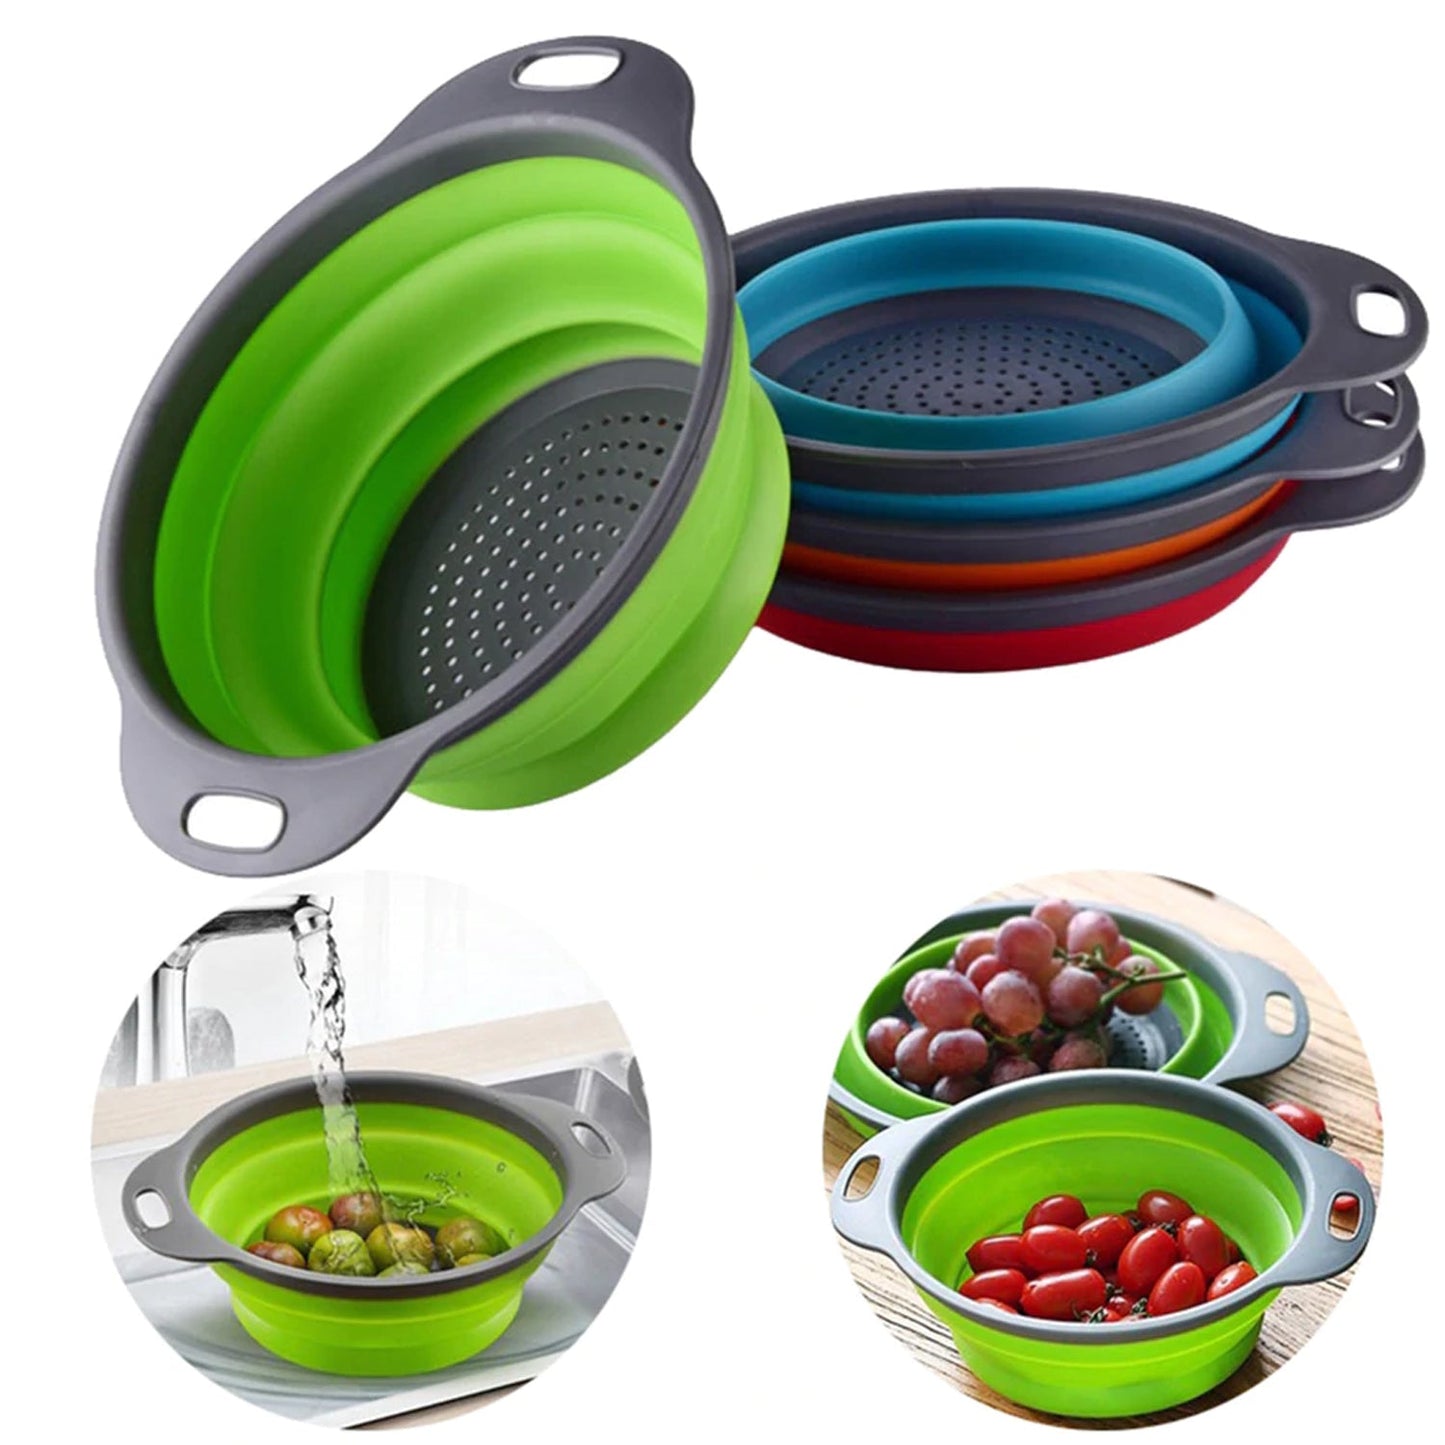 2712 A Round Small Silicone Strainer widely used in all kinds of household kitchen purposes while using at the time of washing utensils for wash basins and sinks etc.